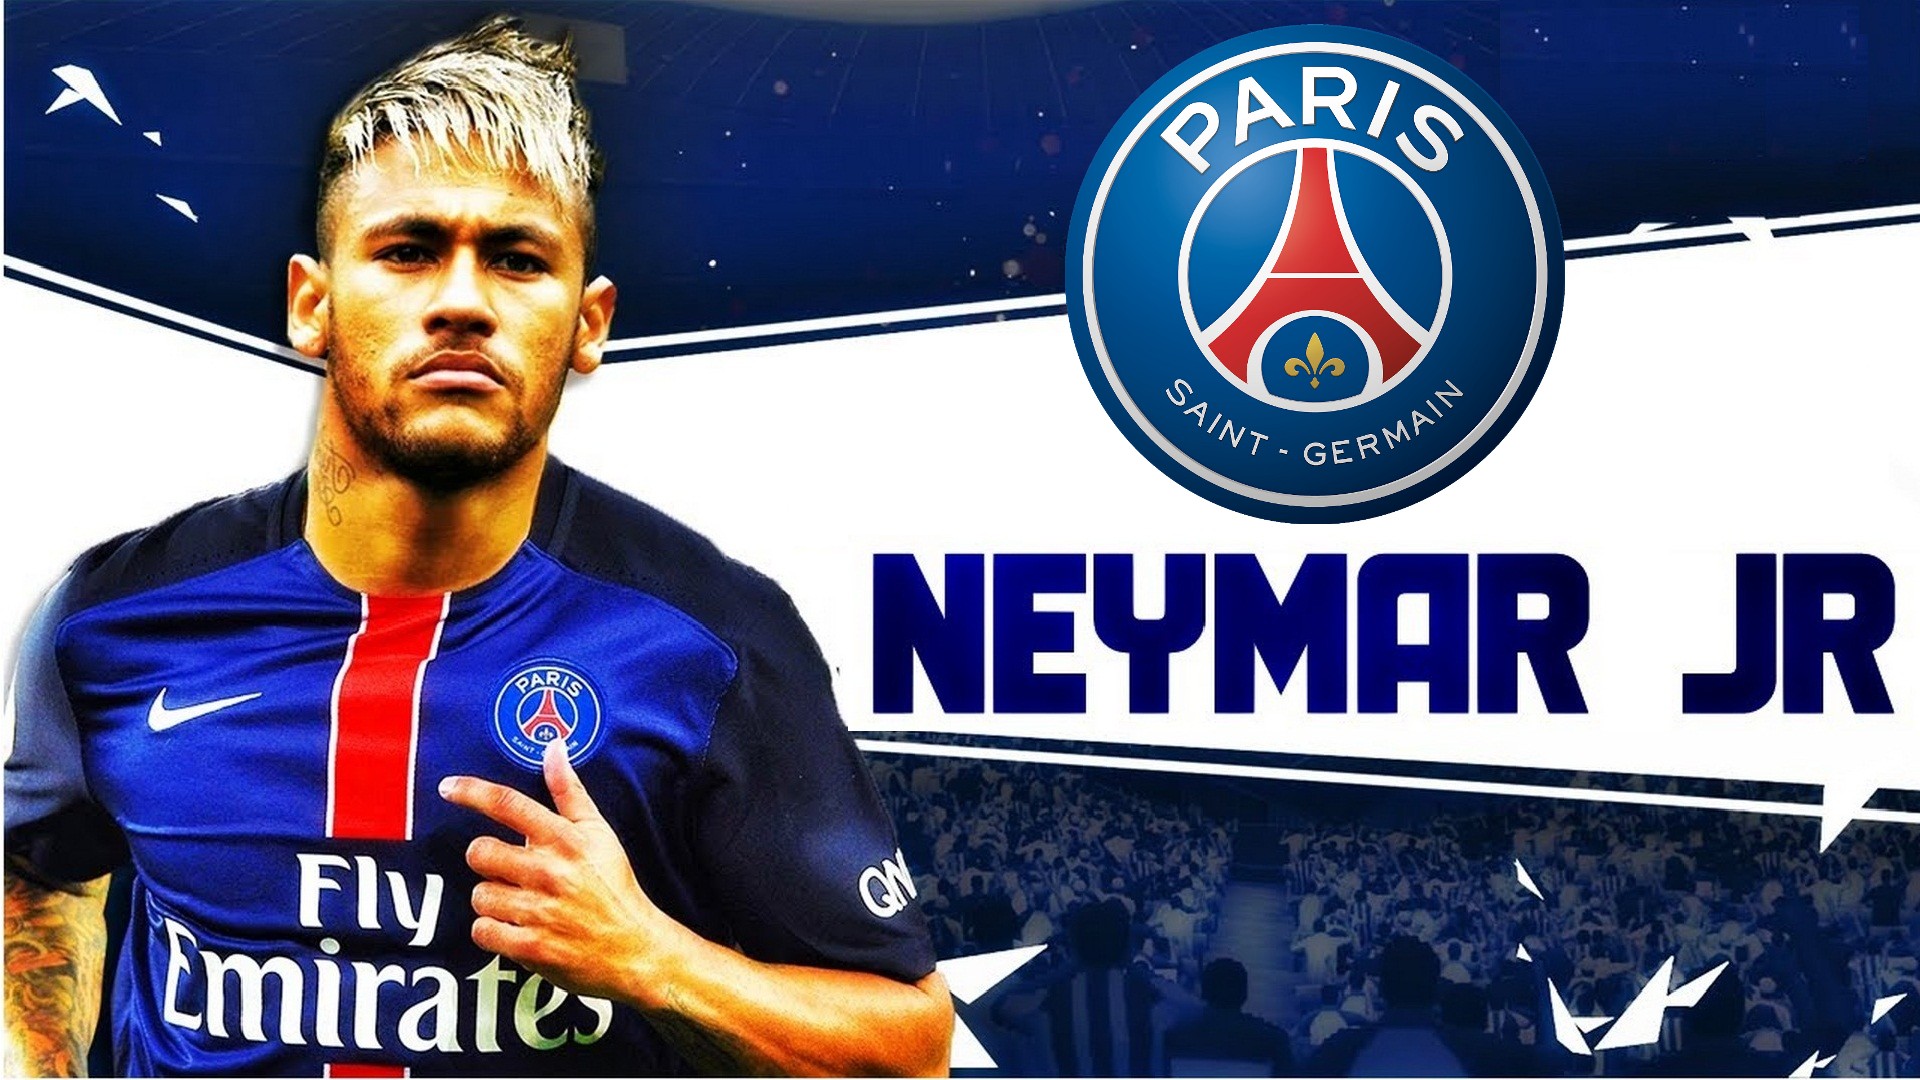 Neymar Paris Saint-Germain Wallpaper with resolution 1920x1080 pixel. You can make this wallpaper for your Mac or Windows Desktop Background, iPhone, Android or Tablet and another Smartphone device